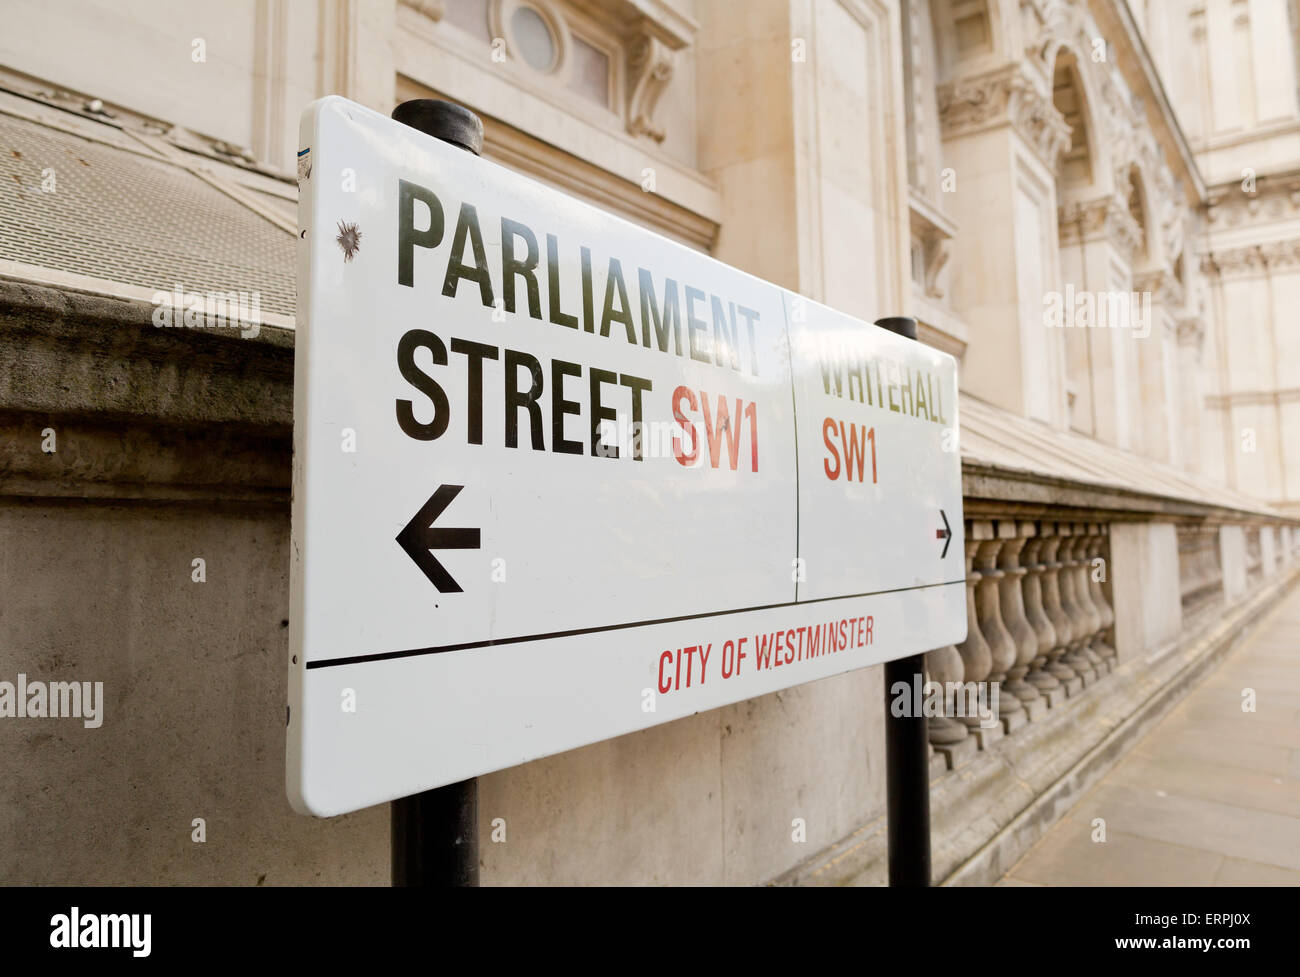 Parliament Street and Whitehall street sign - London, Great Britain, Europe Stock Photo